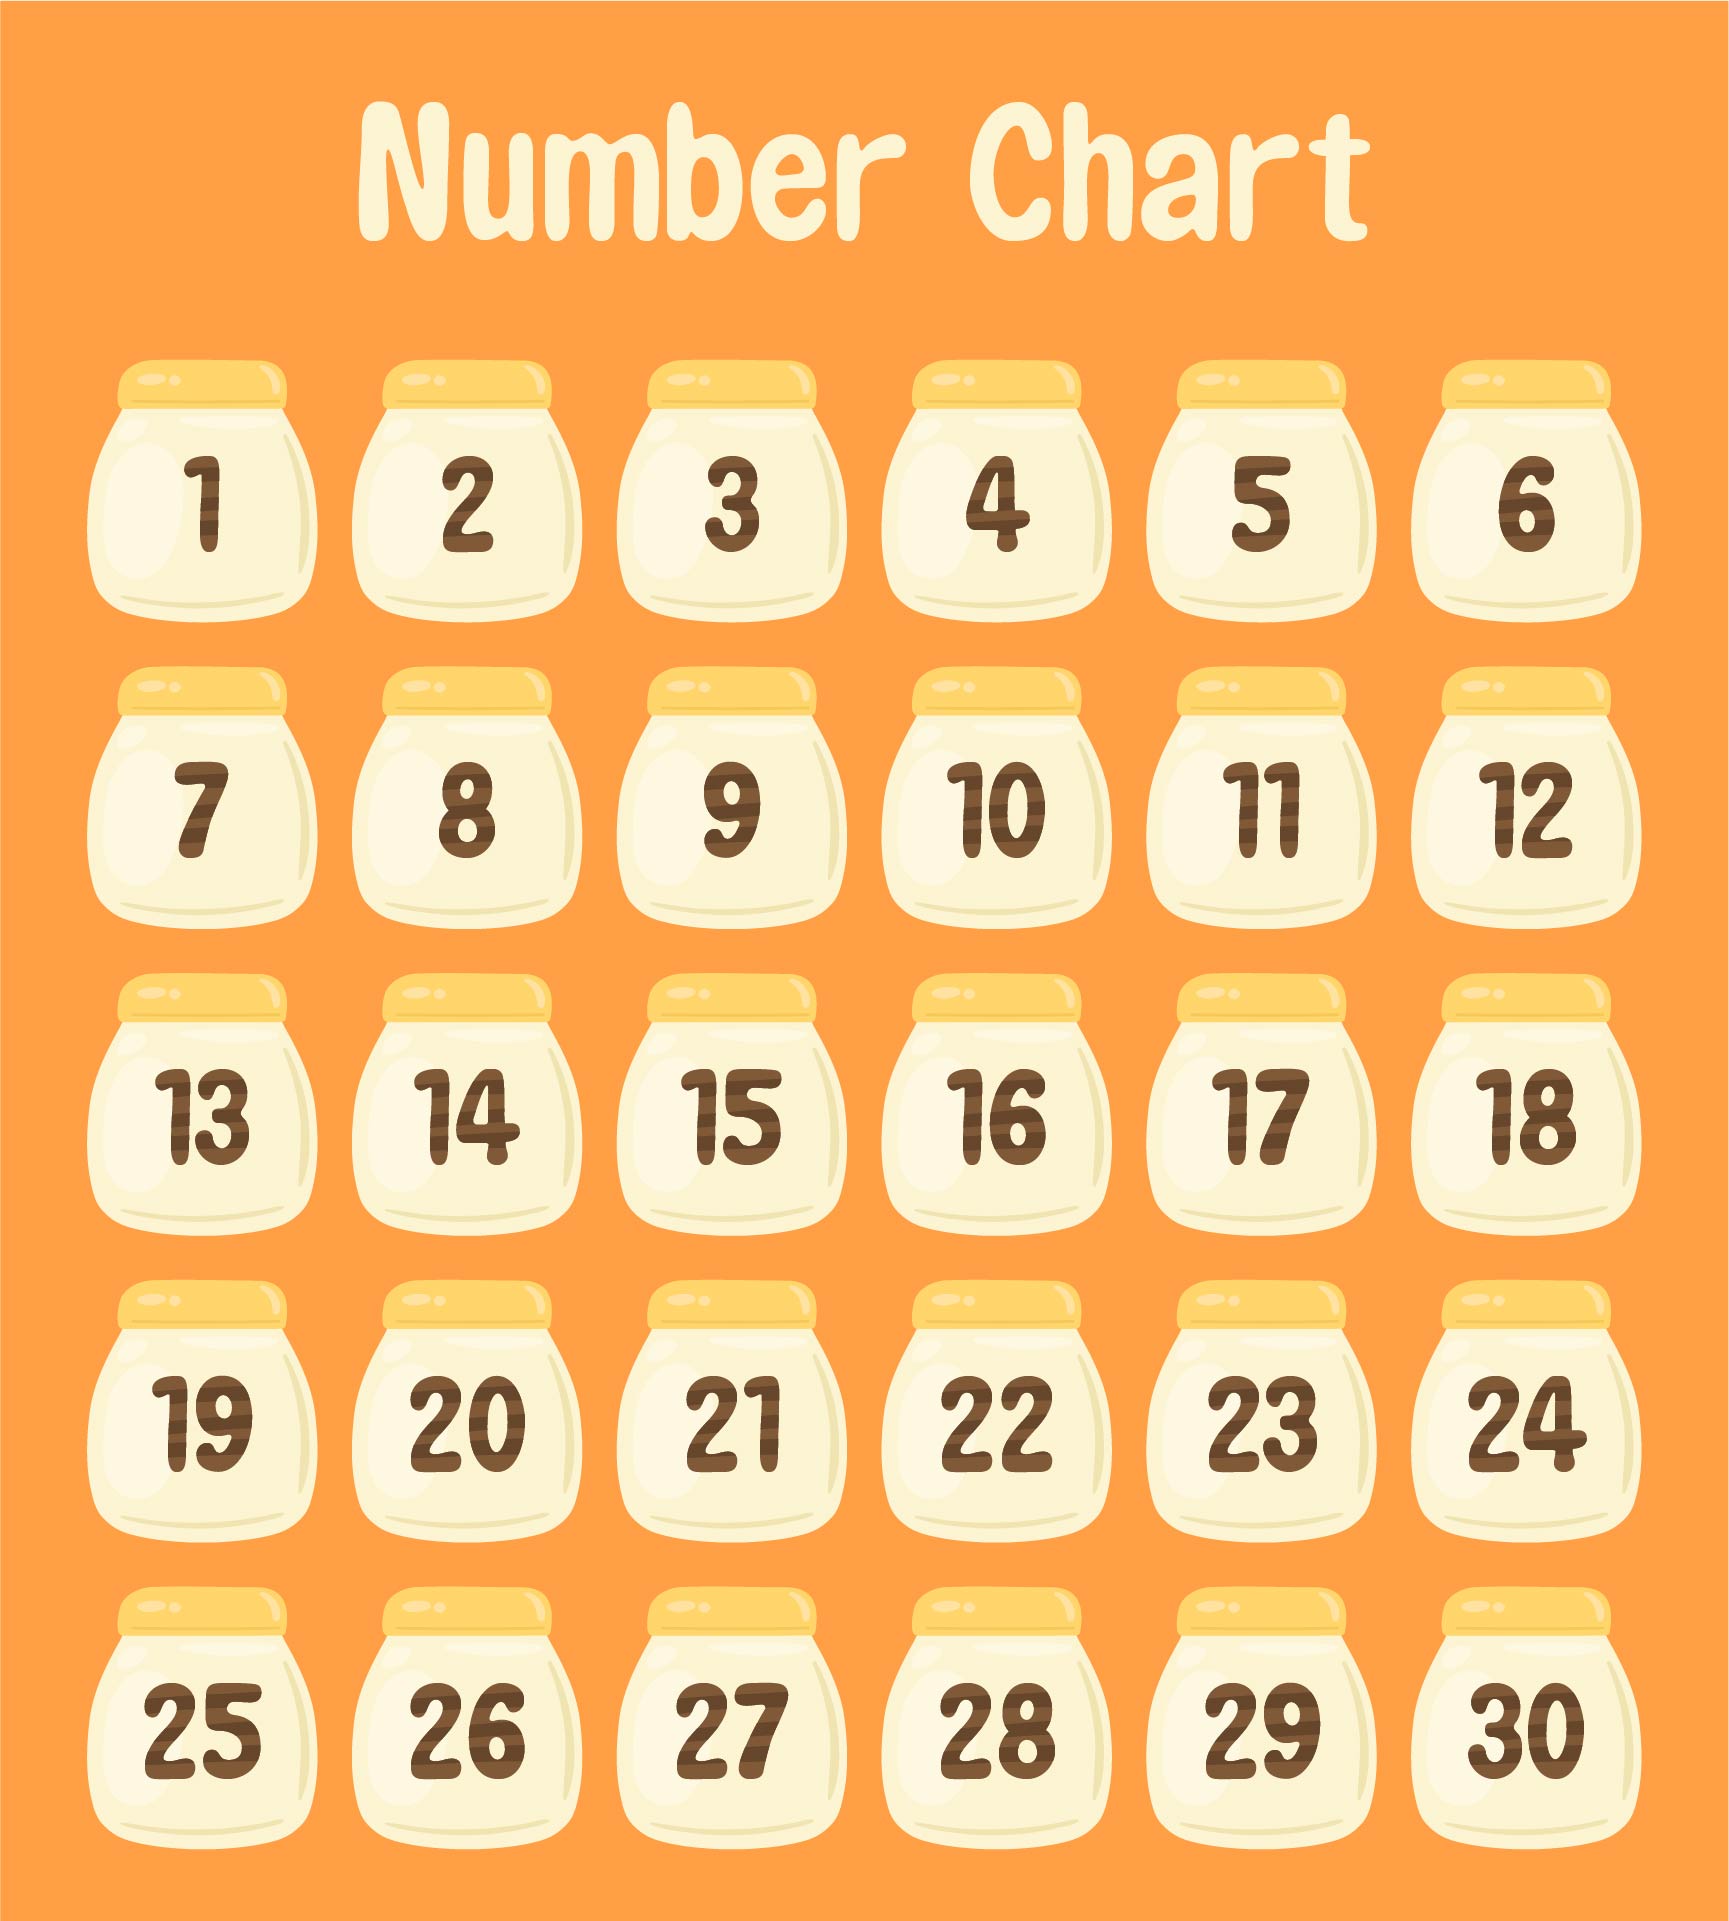 7-best-images-of-printable-number-chart-1-30-number-chart-1-20-printable-printable-numbers-1